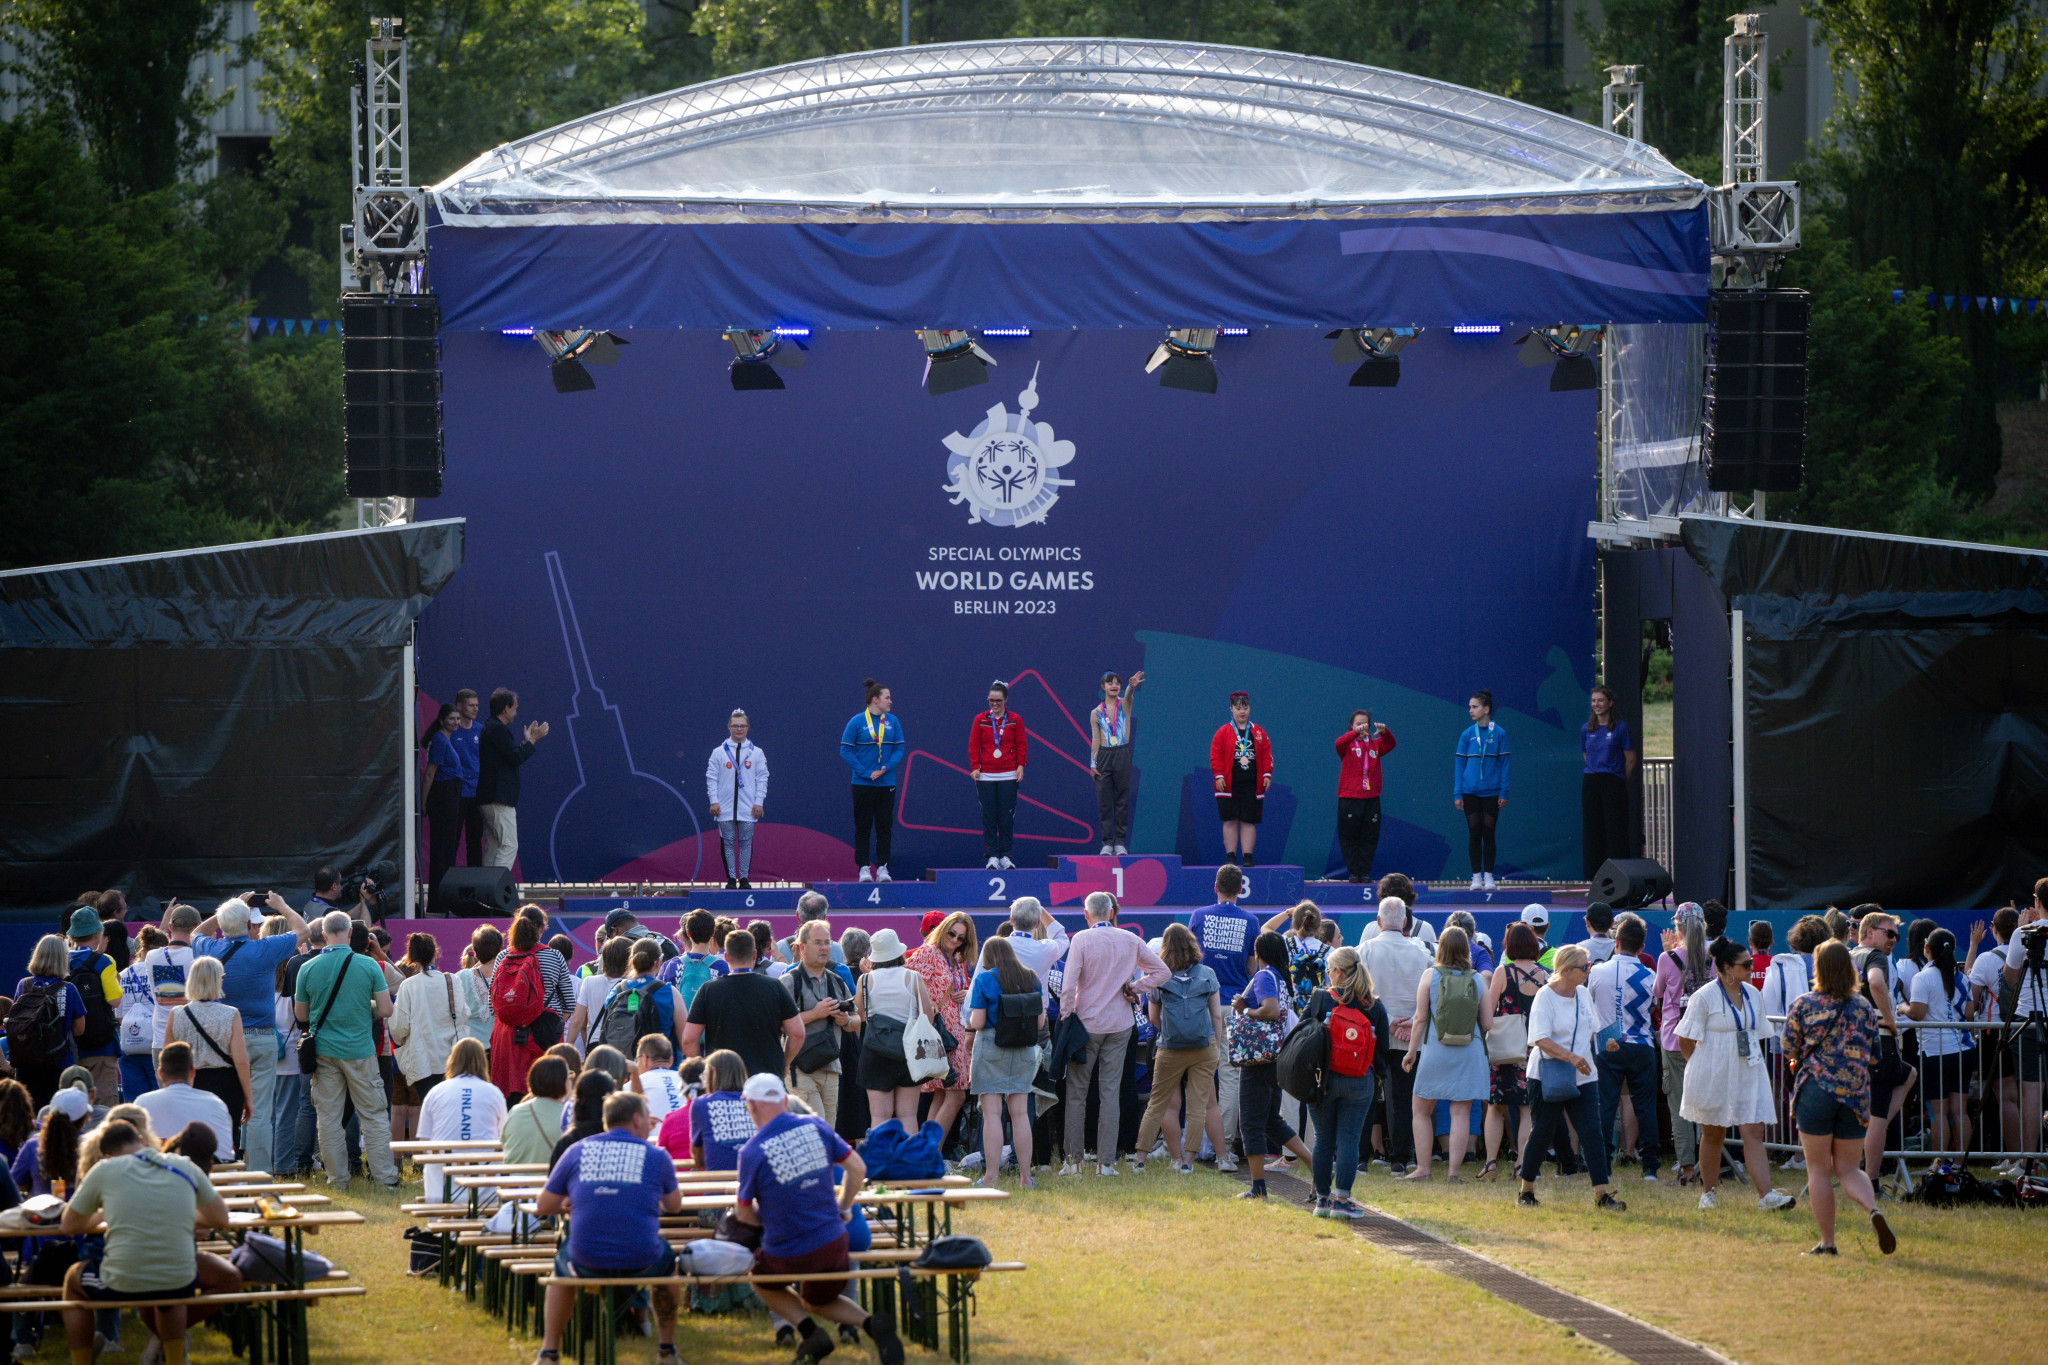 Award ceremonies are taking place outside the Messe Berlin during the Special Olympics World Games ©Special Olympics World Games Berlin 2023